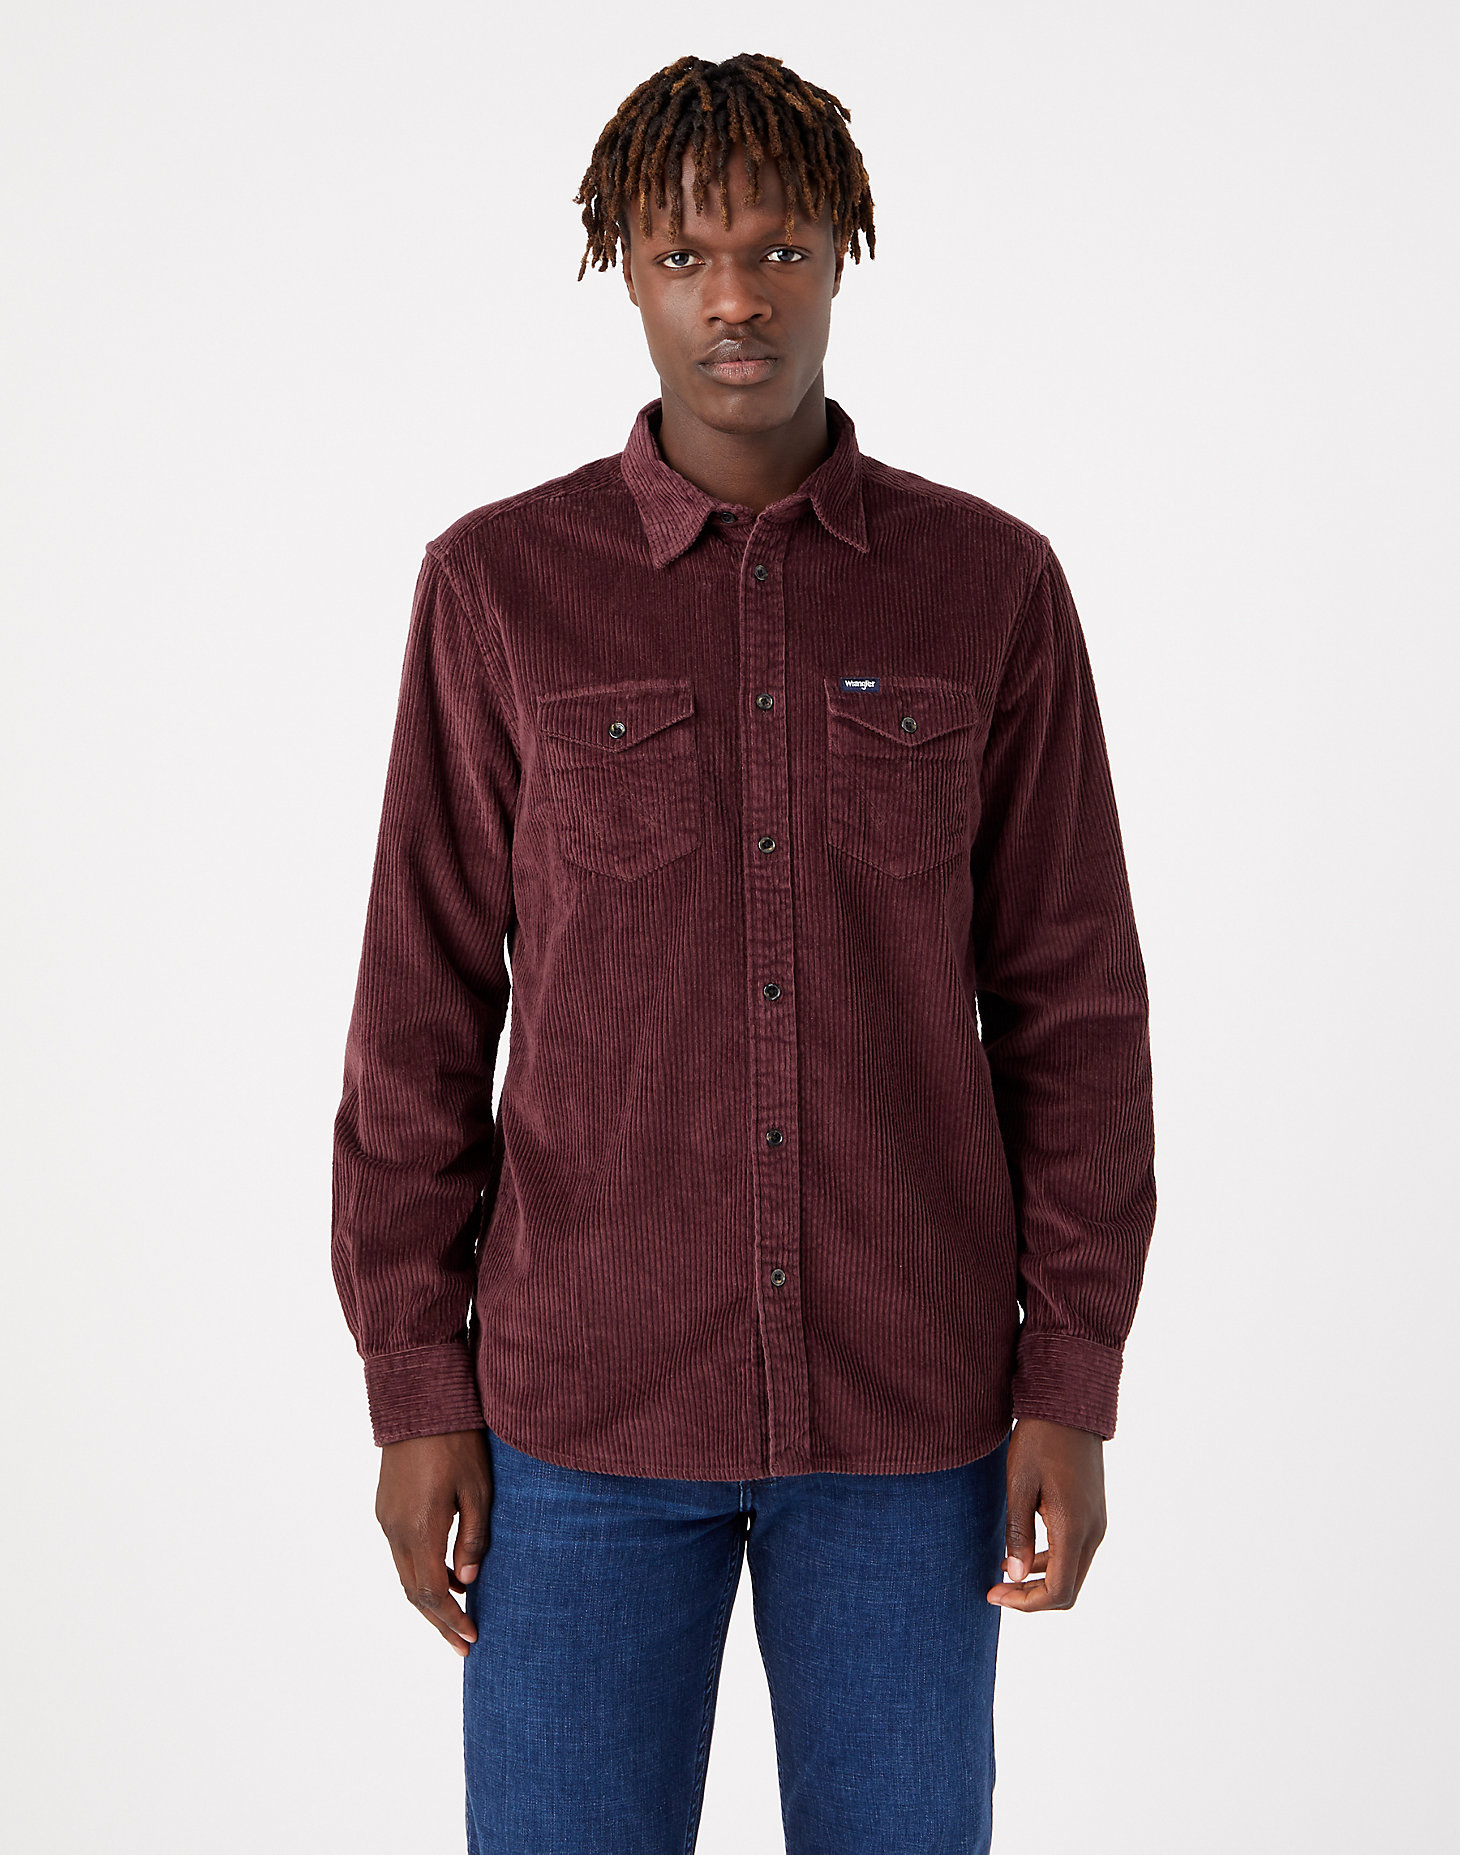 Two Flap Pocket Shirt in Aubergine main view